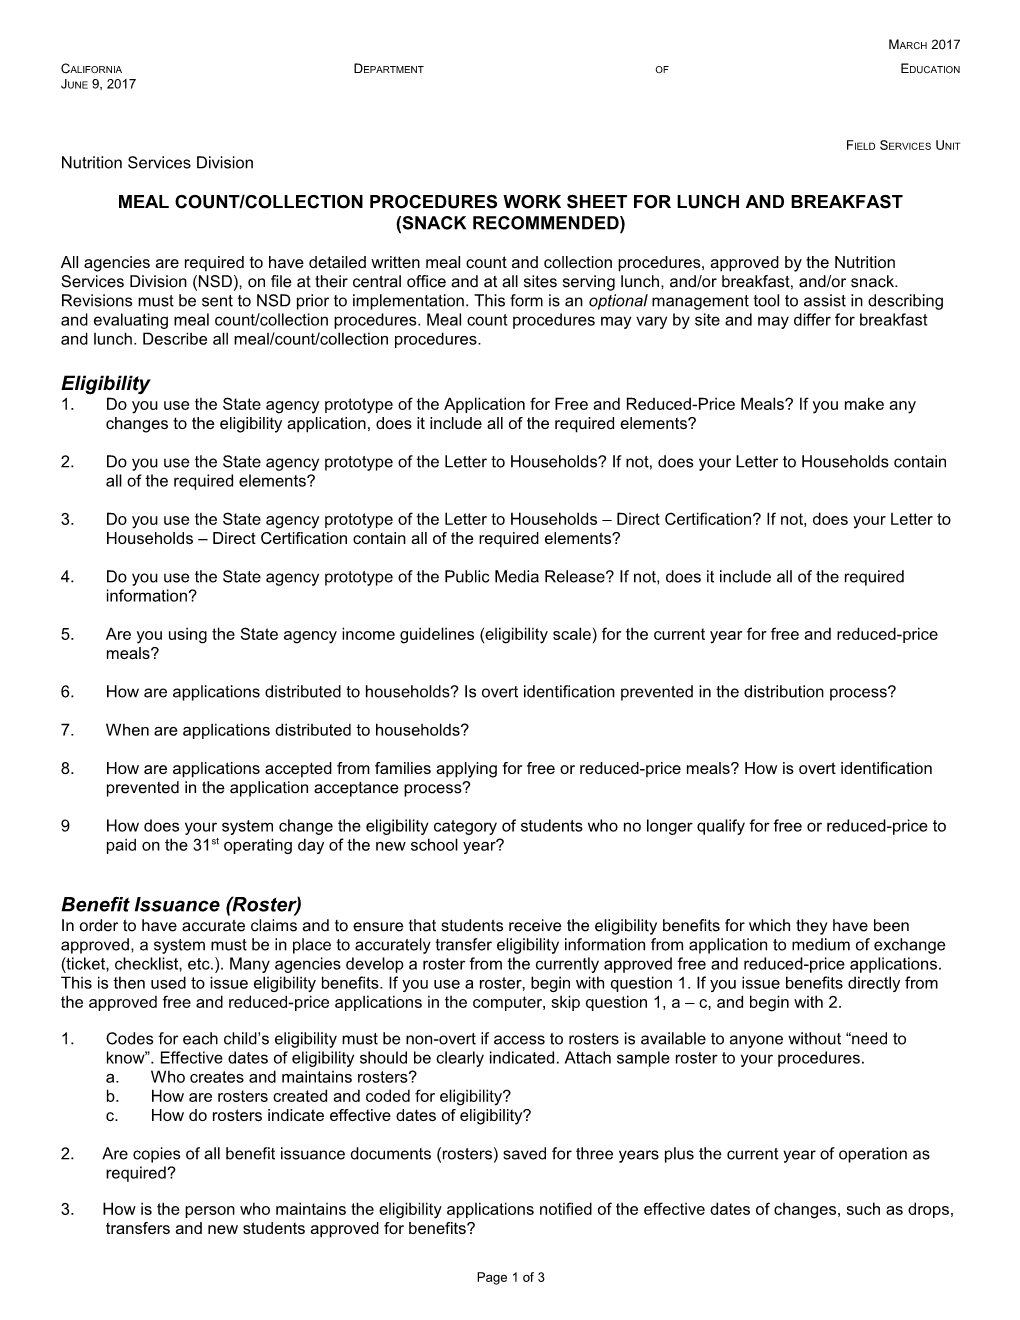 MCCP Worksheet for Lunch and Breakfast - School Nutrition (CA Department of Education)